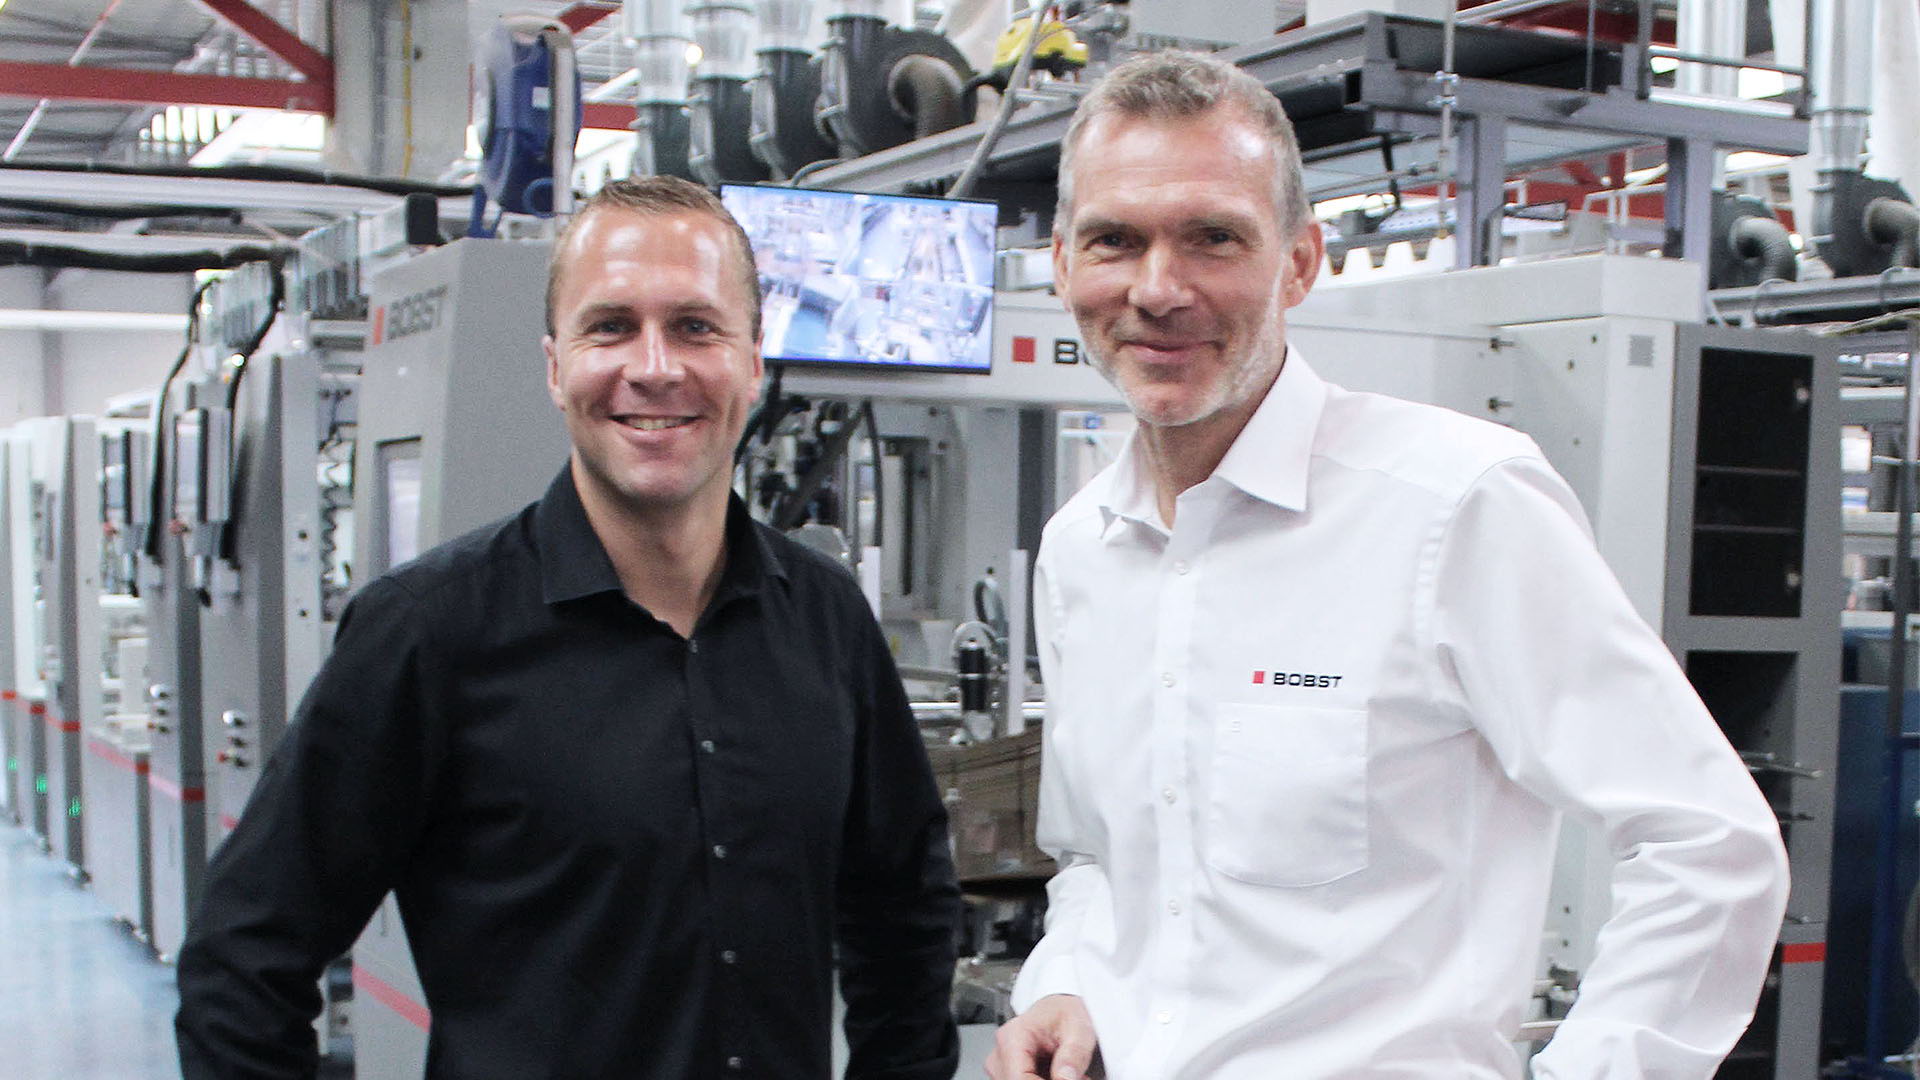 WELLSTAR Operations Manager Sebastian Würth (left) and Michael Linden from Bobst Meerbusch with the e-commerce version of the BOBST EXPERTFOLD 165